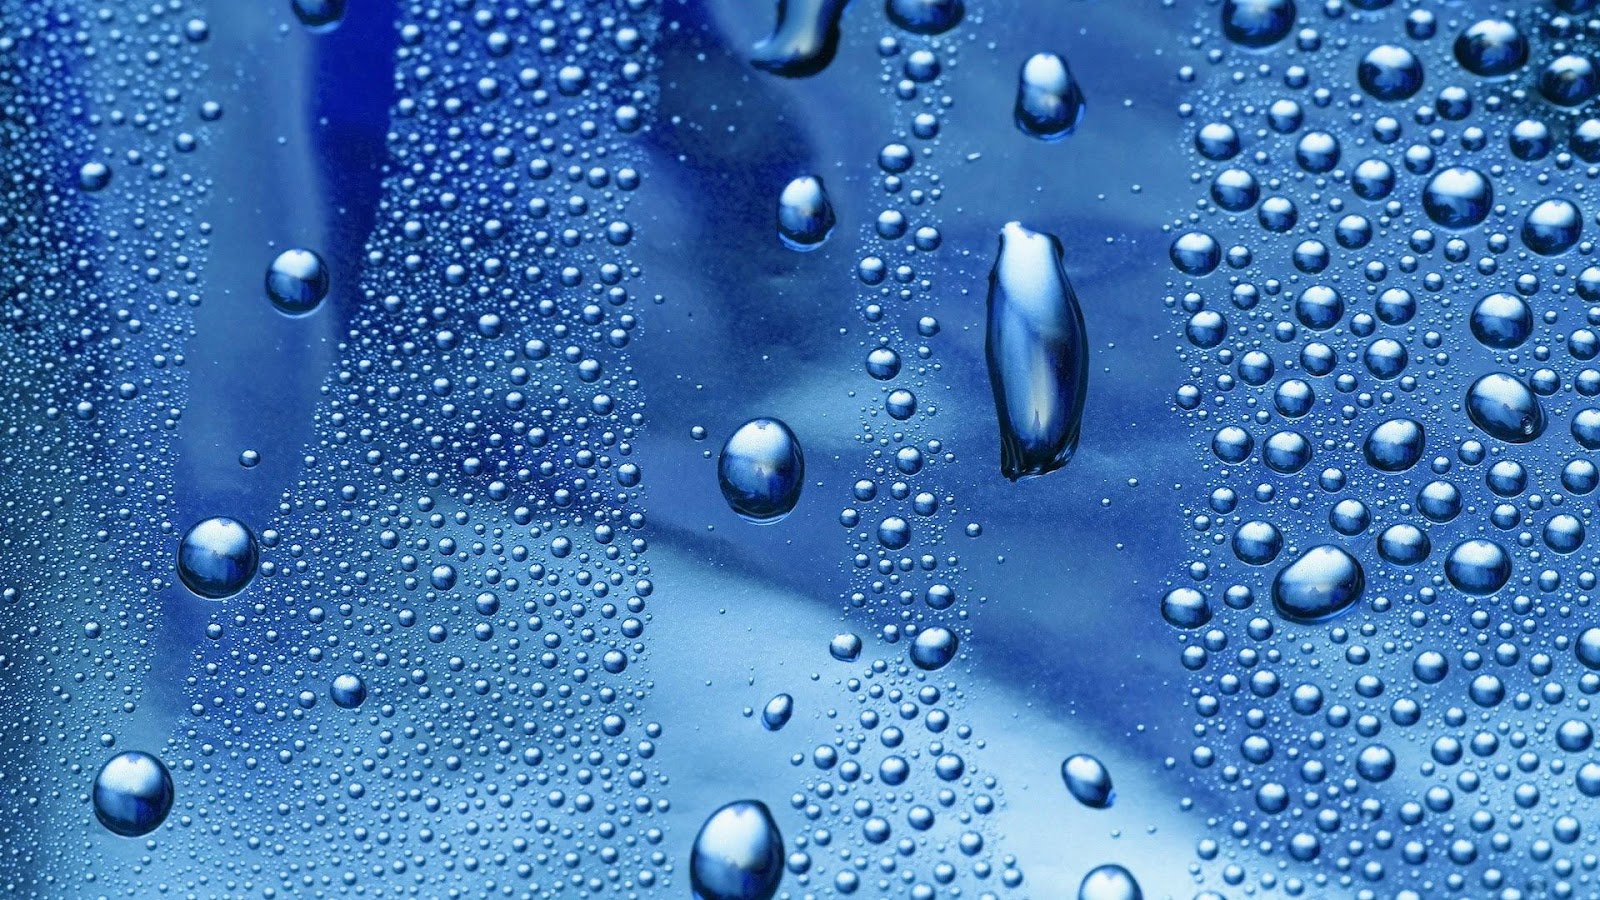 raindrops on blue window wallpaper View All View All